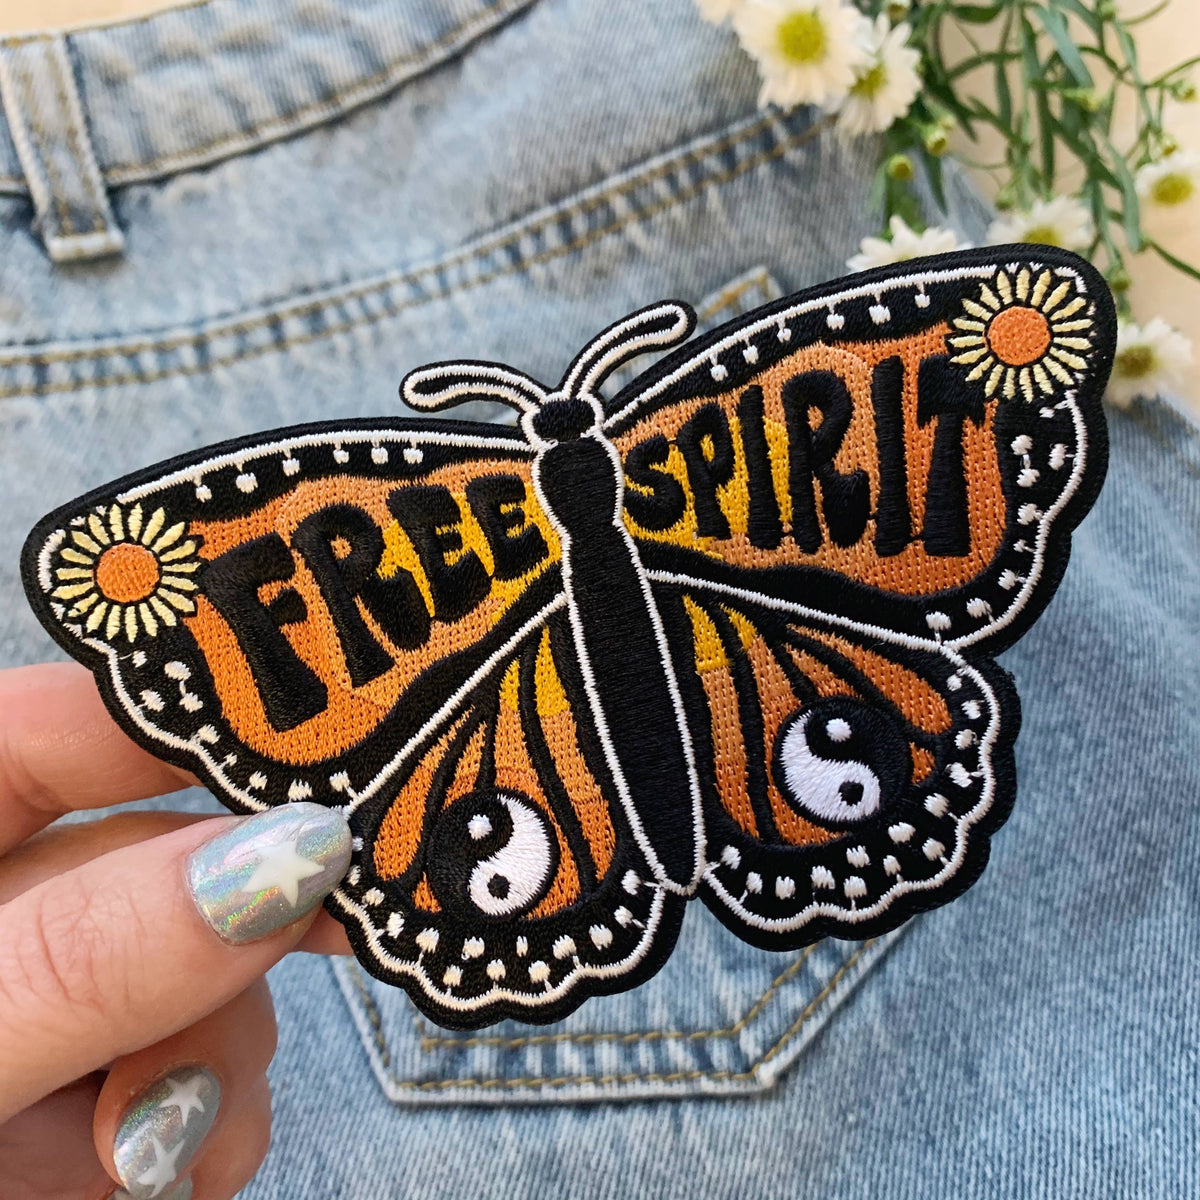 Patch - Butterfly Collection - Free Spirit Butterfly